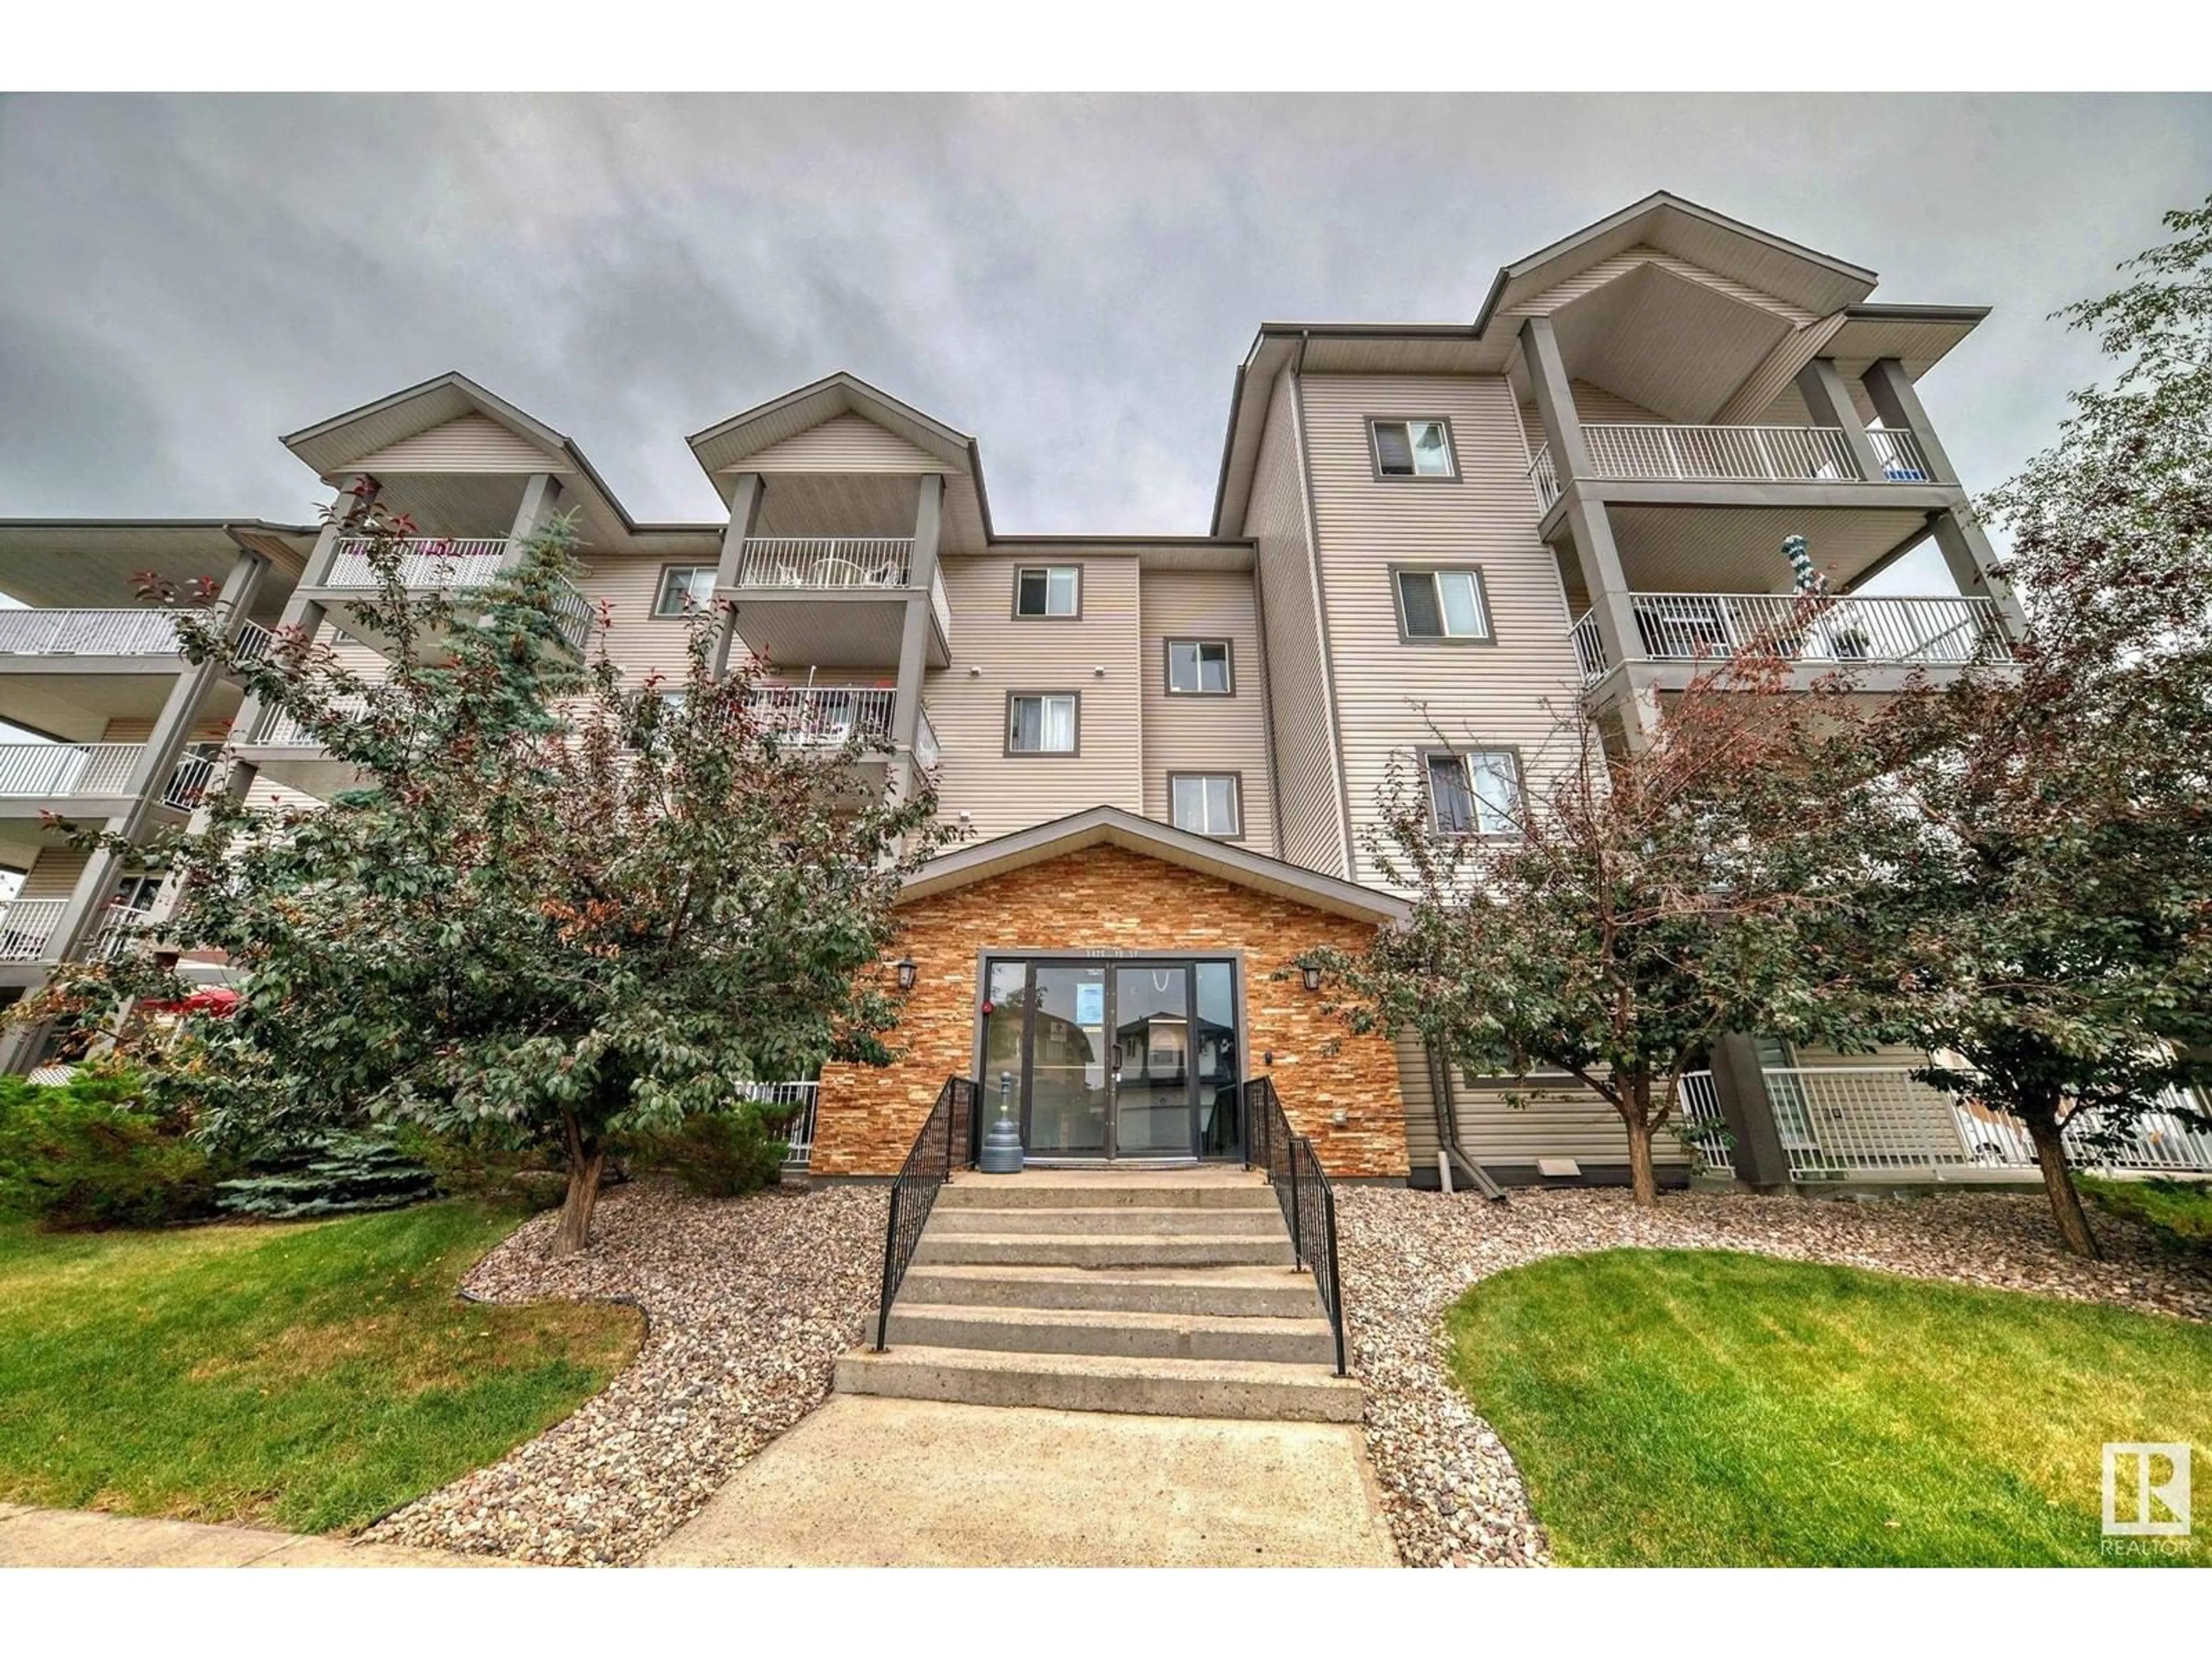 A pic from exterior of the house or condo for #417 3425 19 ST NW, Edmonton Alberta T6T2B5